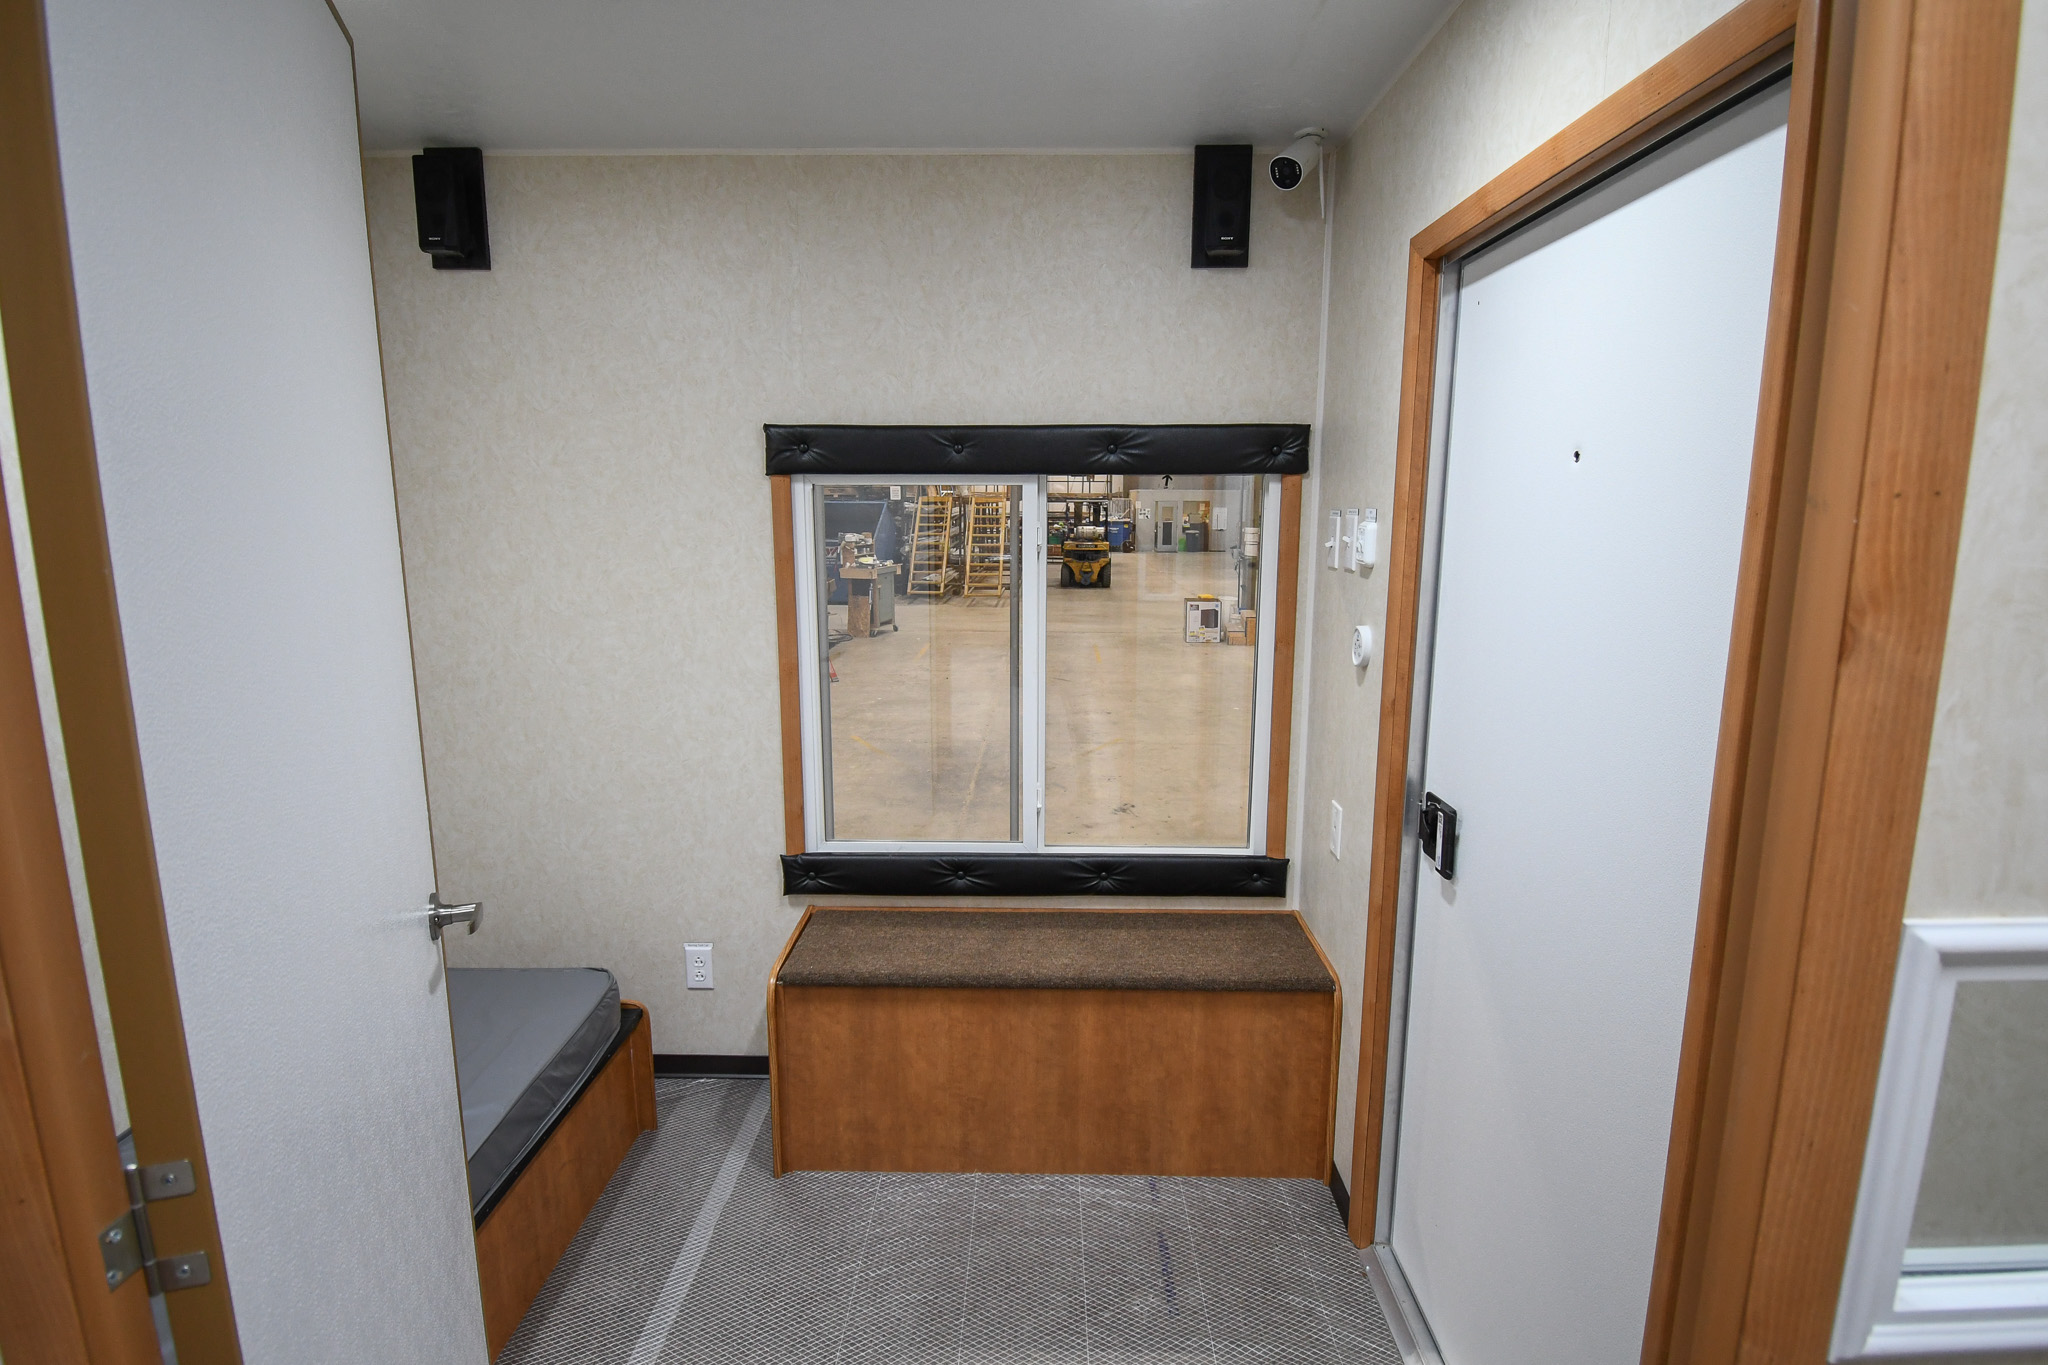 A view of the bedroom stage inside the unit for Gaithersburg, MD.